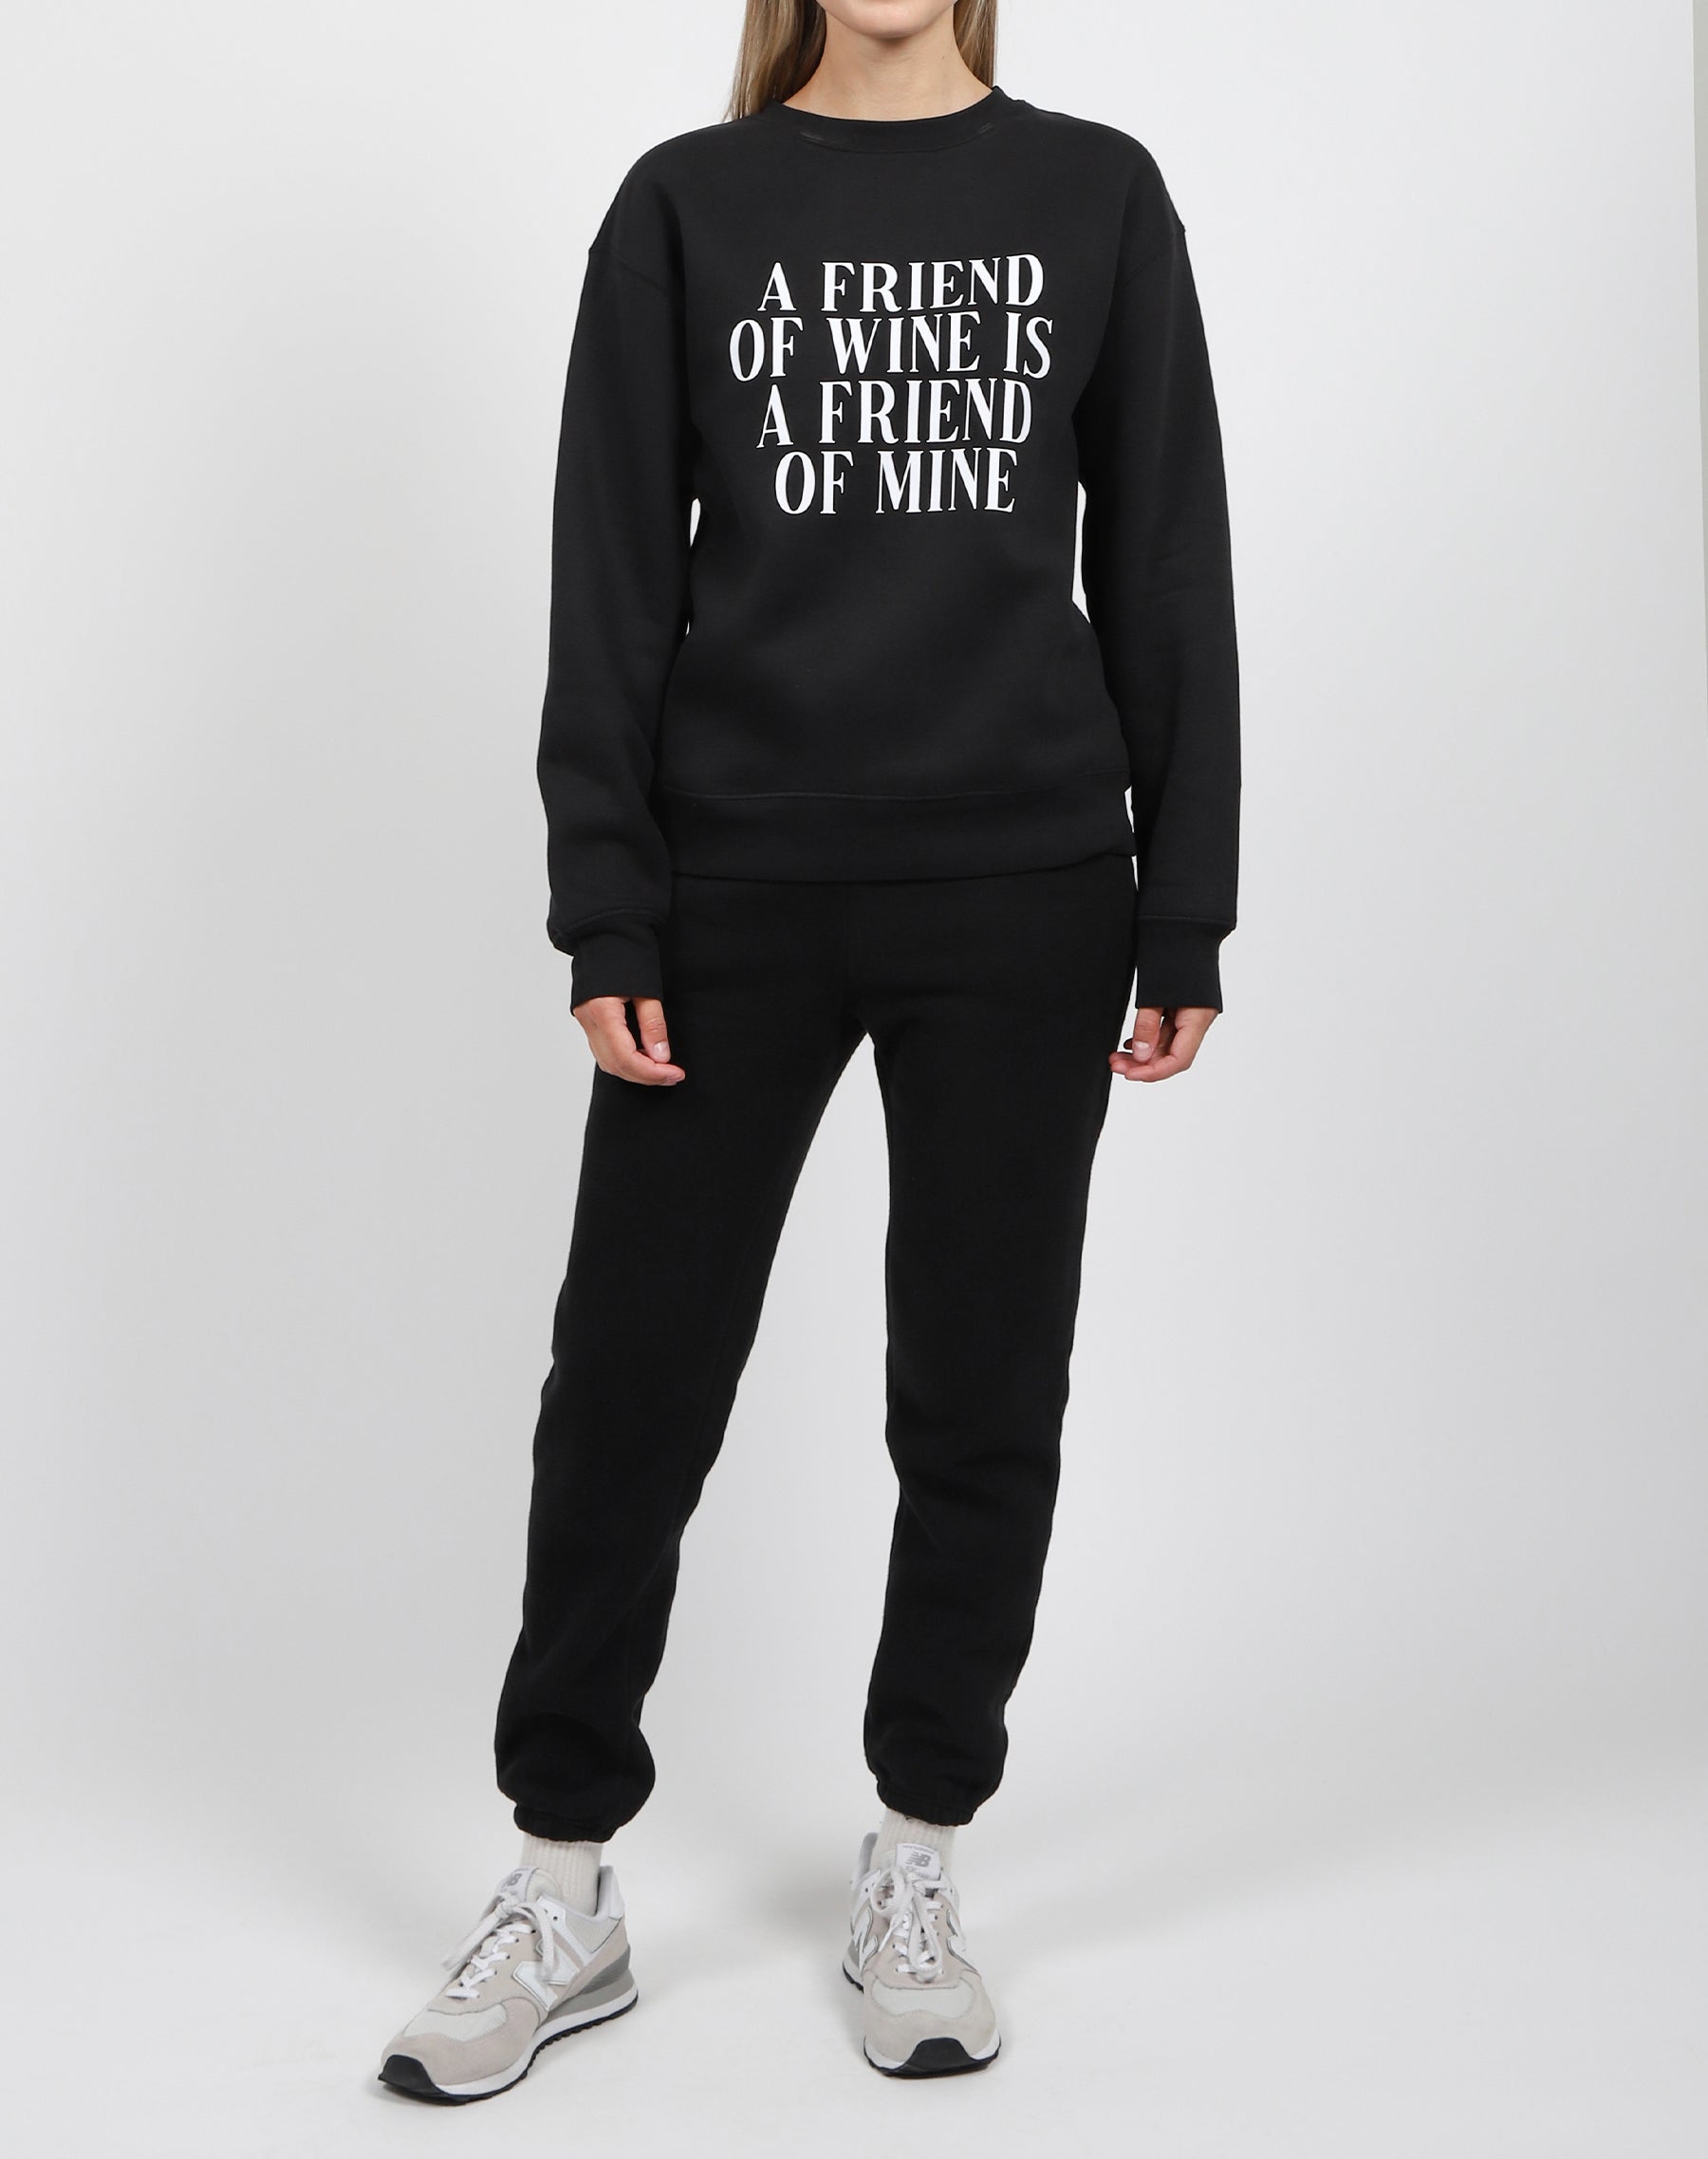 BLNVKOP I'm The Middle Sister 3 Sisters Hoodie Womens Plus Size Letter  Printed Oversized Sweatshirt Tomorrow Delivery Items E-black at   Women's Clothing store